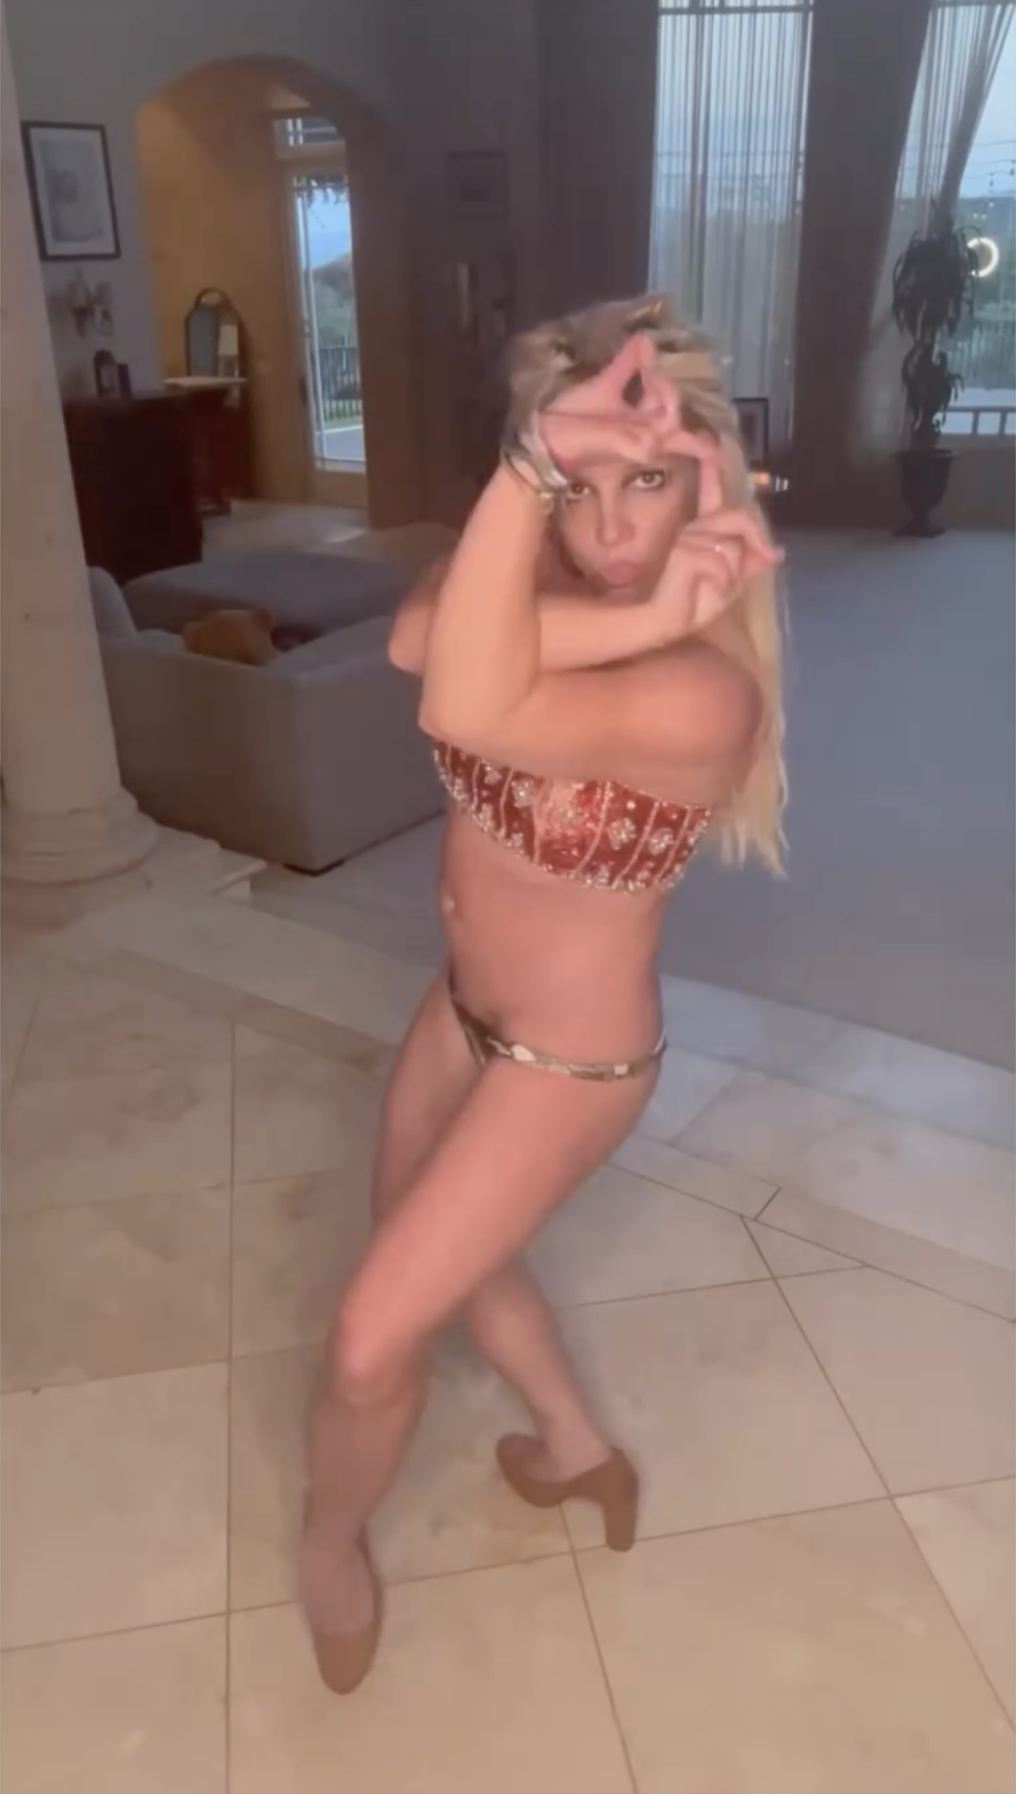 Britney Spears posted the video and her apology to Instagram on Saturday